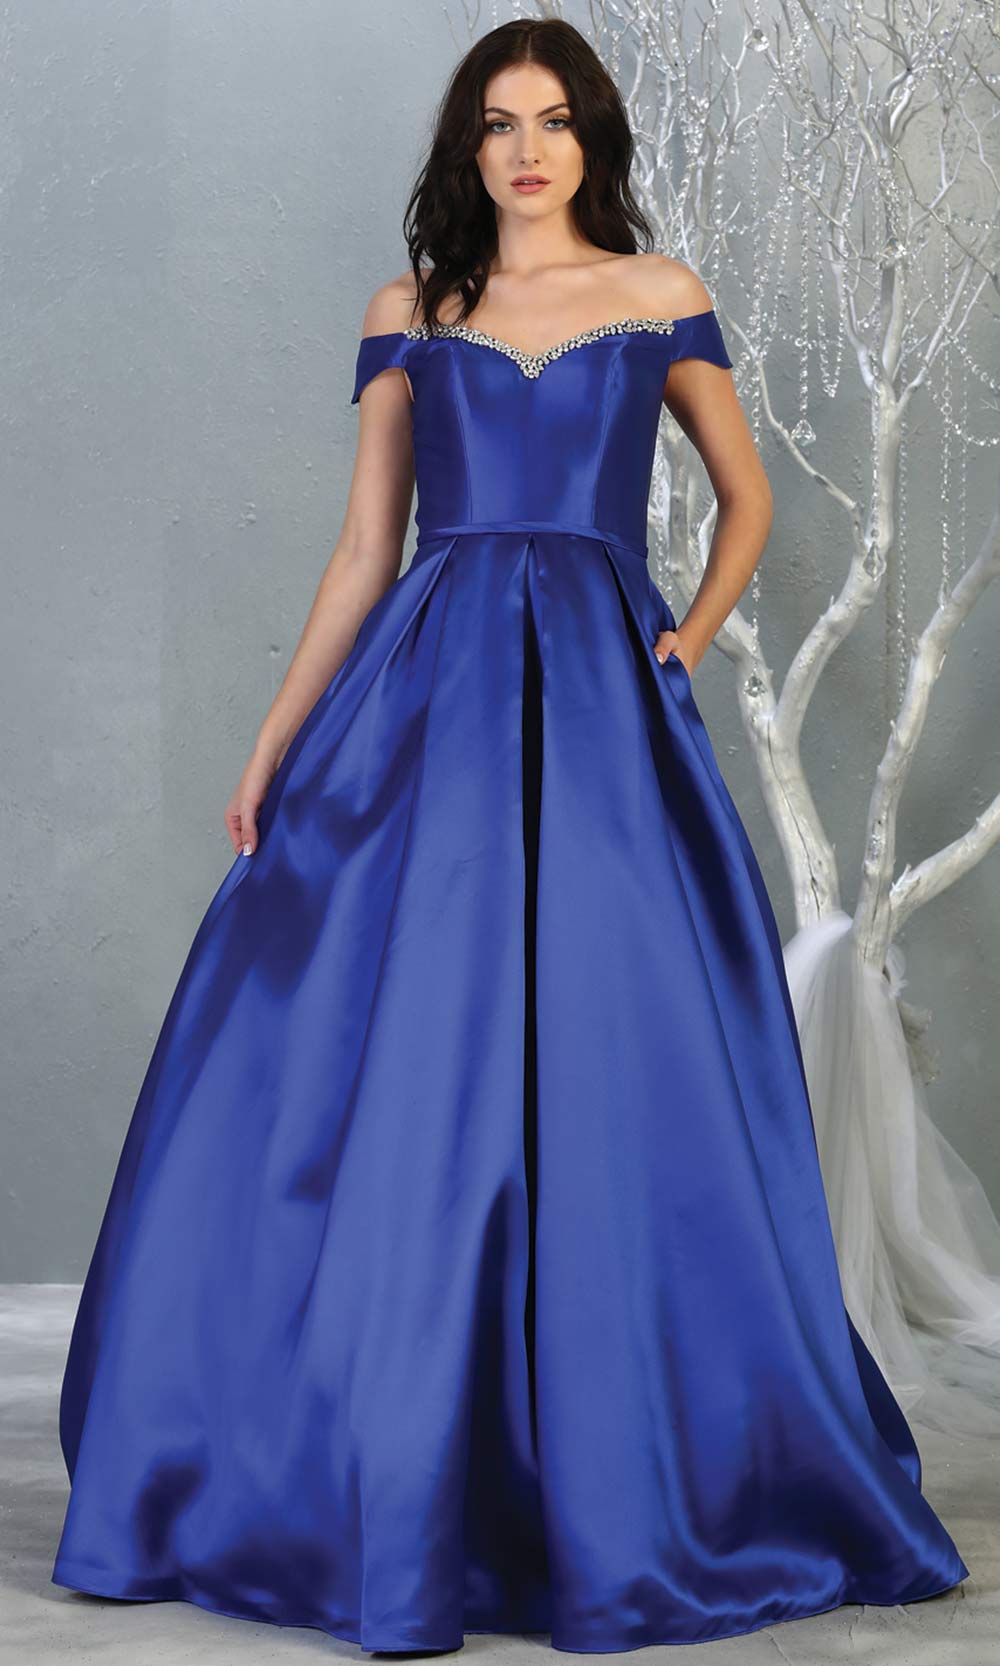 Mayqueen MQ 1784 long royal blue off shoulder evening flowy dress. Full length royal blue satin taffeta gown is perfect for  enagagement/e-shoot dress, formal wedding guest, indowestern gown, evening party dress, prom, bridesmaid. Plus sizes avail.jpg